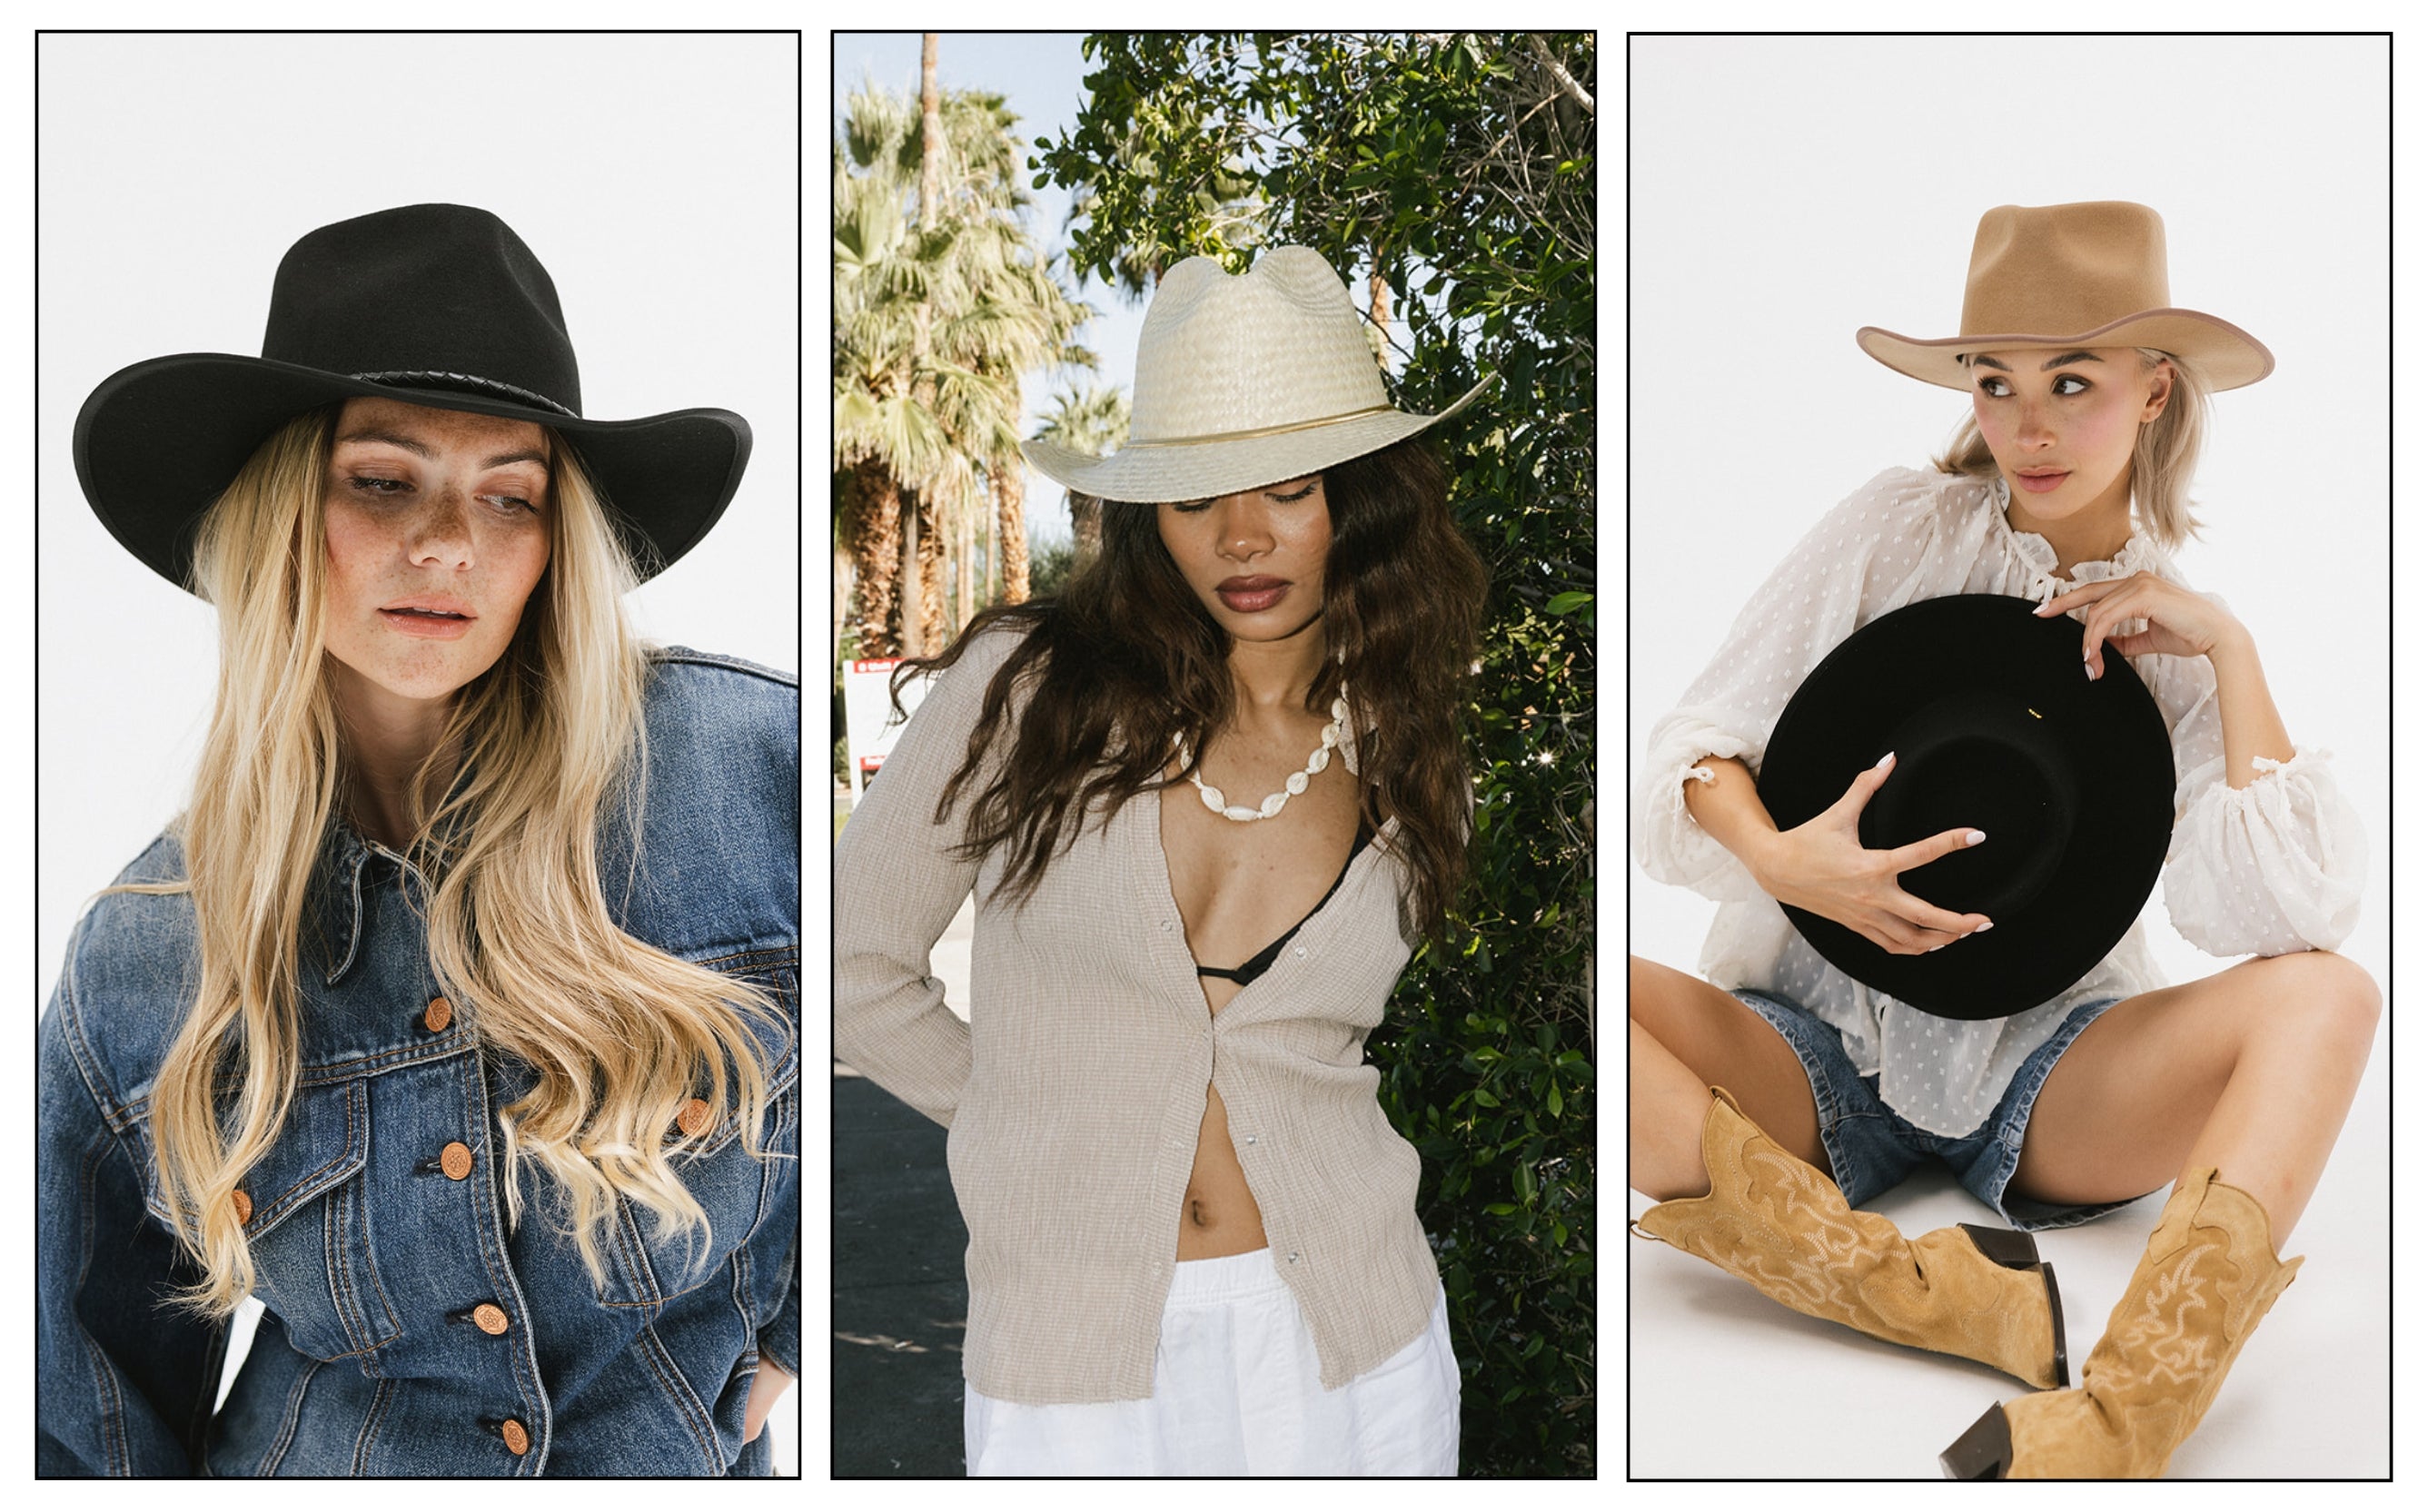 3 images of women in hats that look like the western hats that celebs wear